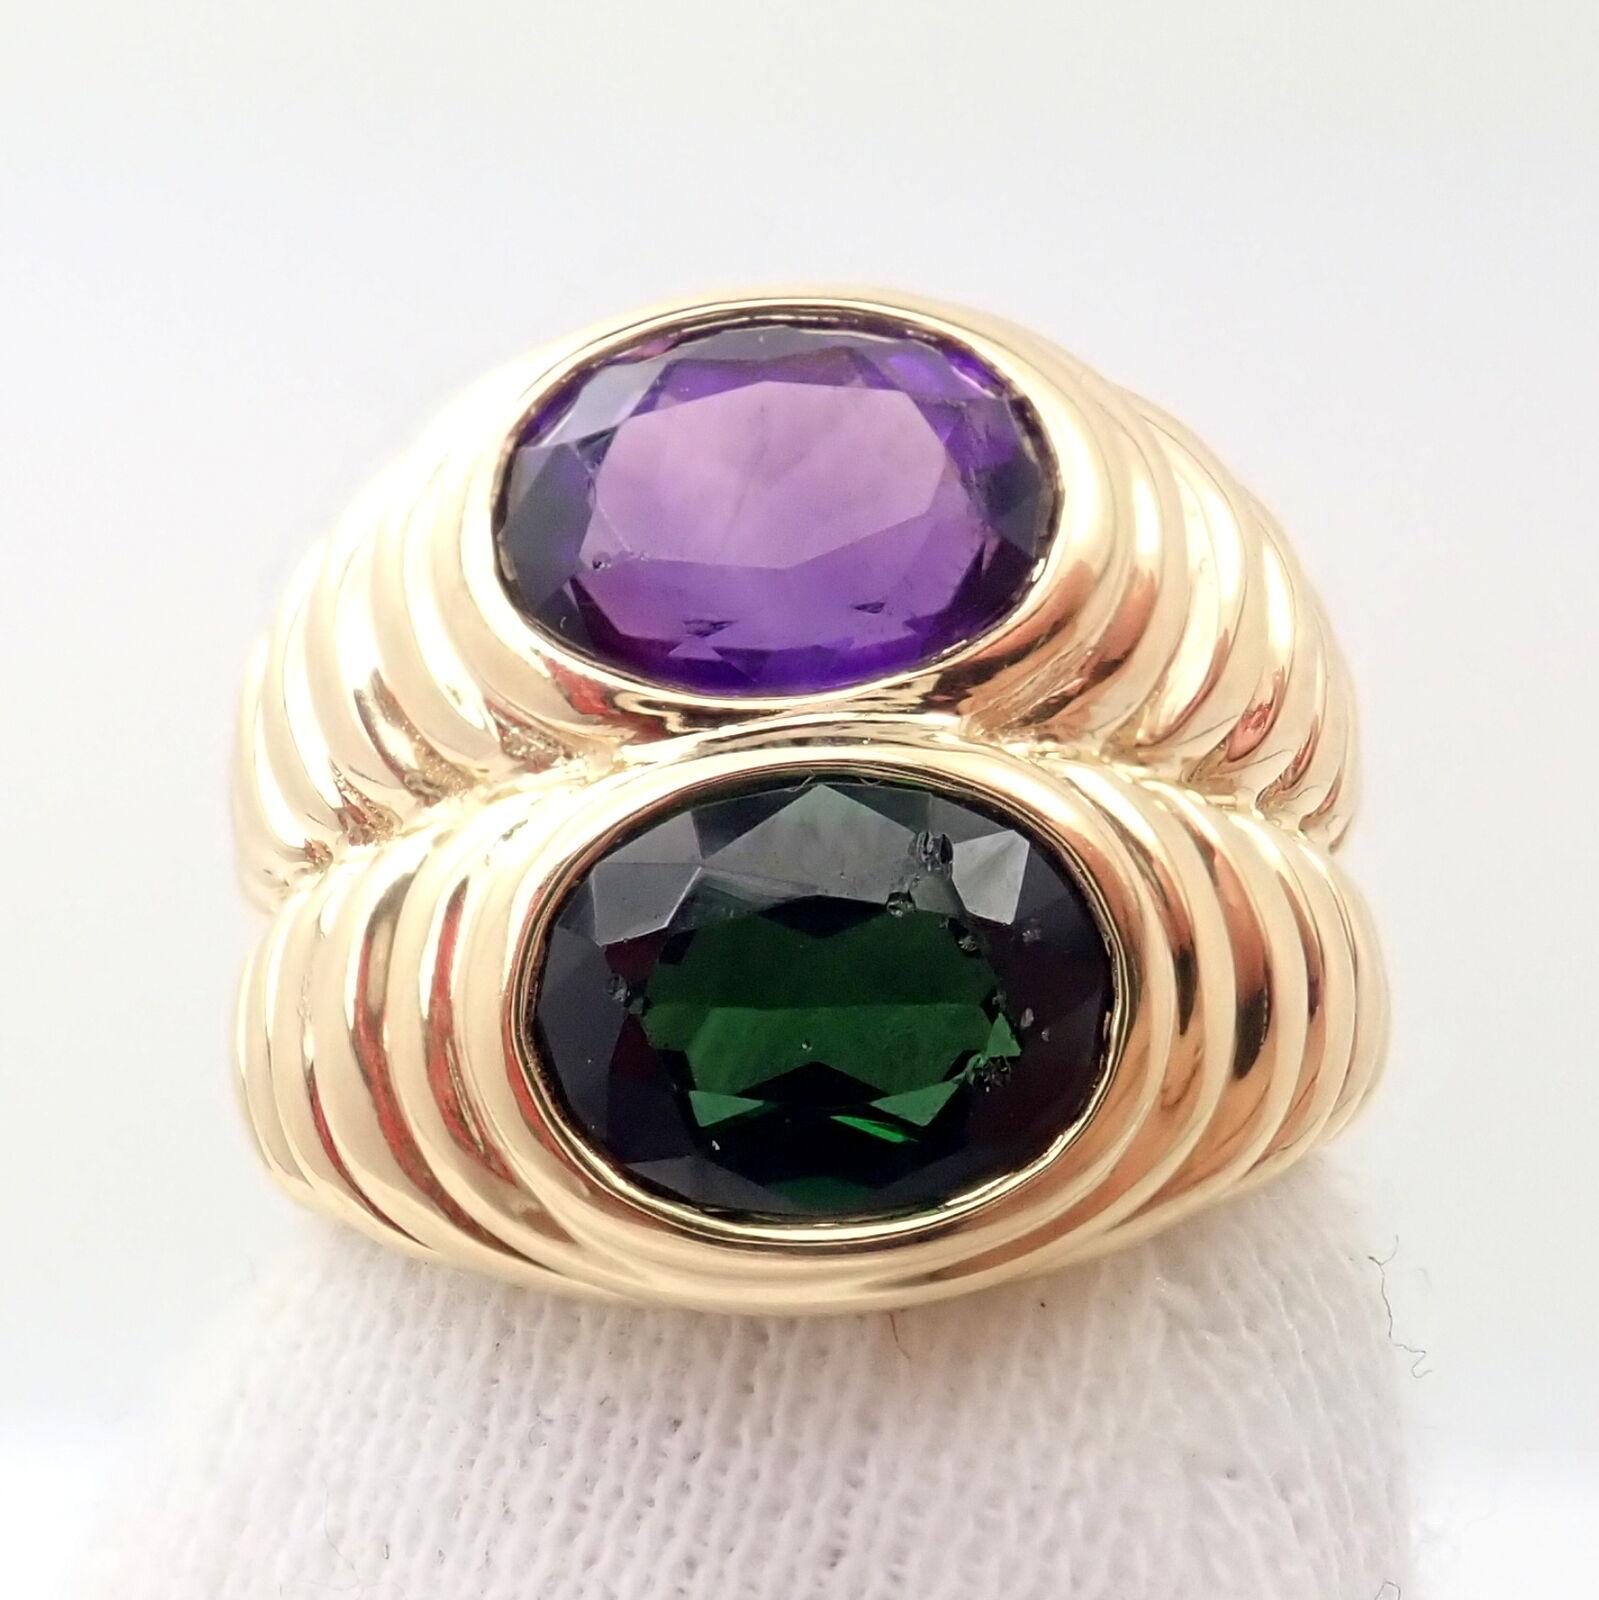 18k Yellow Gold Amethyst And Green Tourmaline Twin Doppio Ring By Bulgari. 
With 1 Amethyst 7mm x 8mm
1 Green Tourmaline 7mm x 8mm
Details:
Ring Size: 6.5 (resize available)
Width: 17mm
Weight: 15 grams
Stamped Hallmarks: Bvlgari 750 296ROMA
*Free